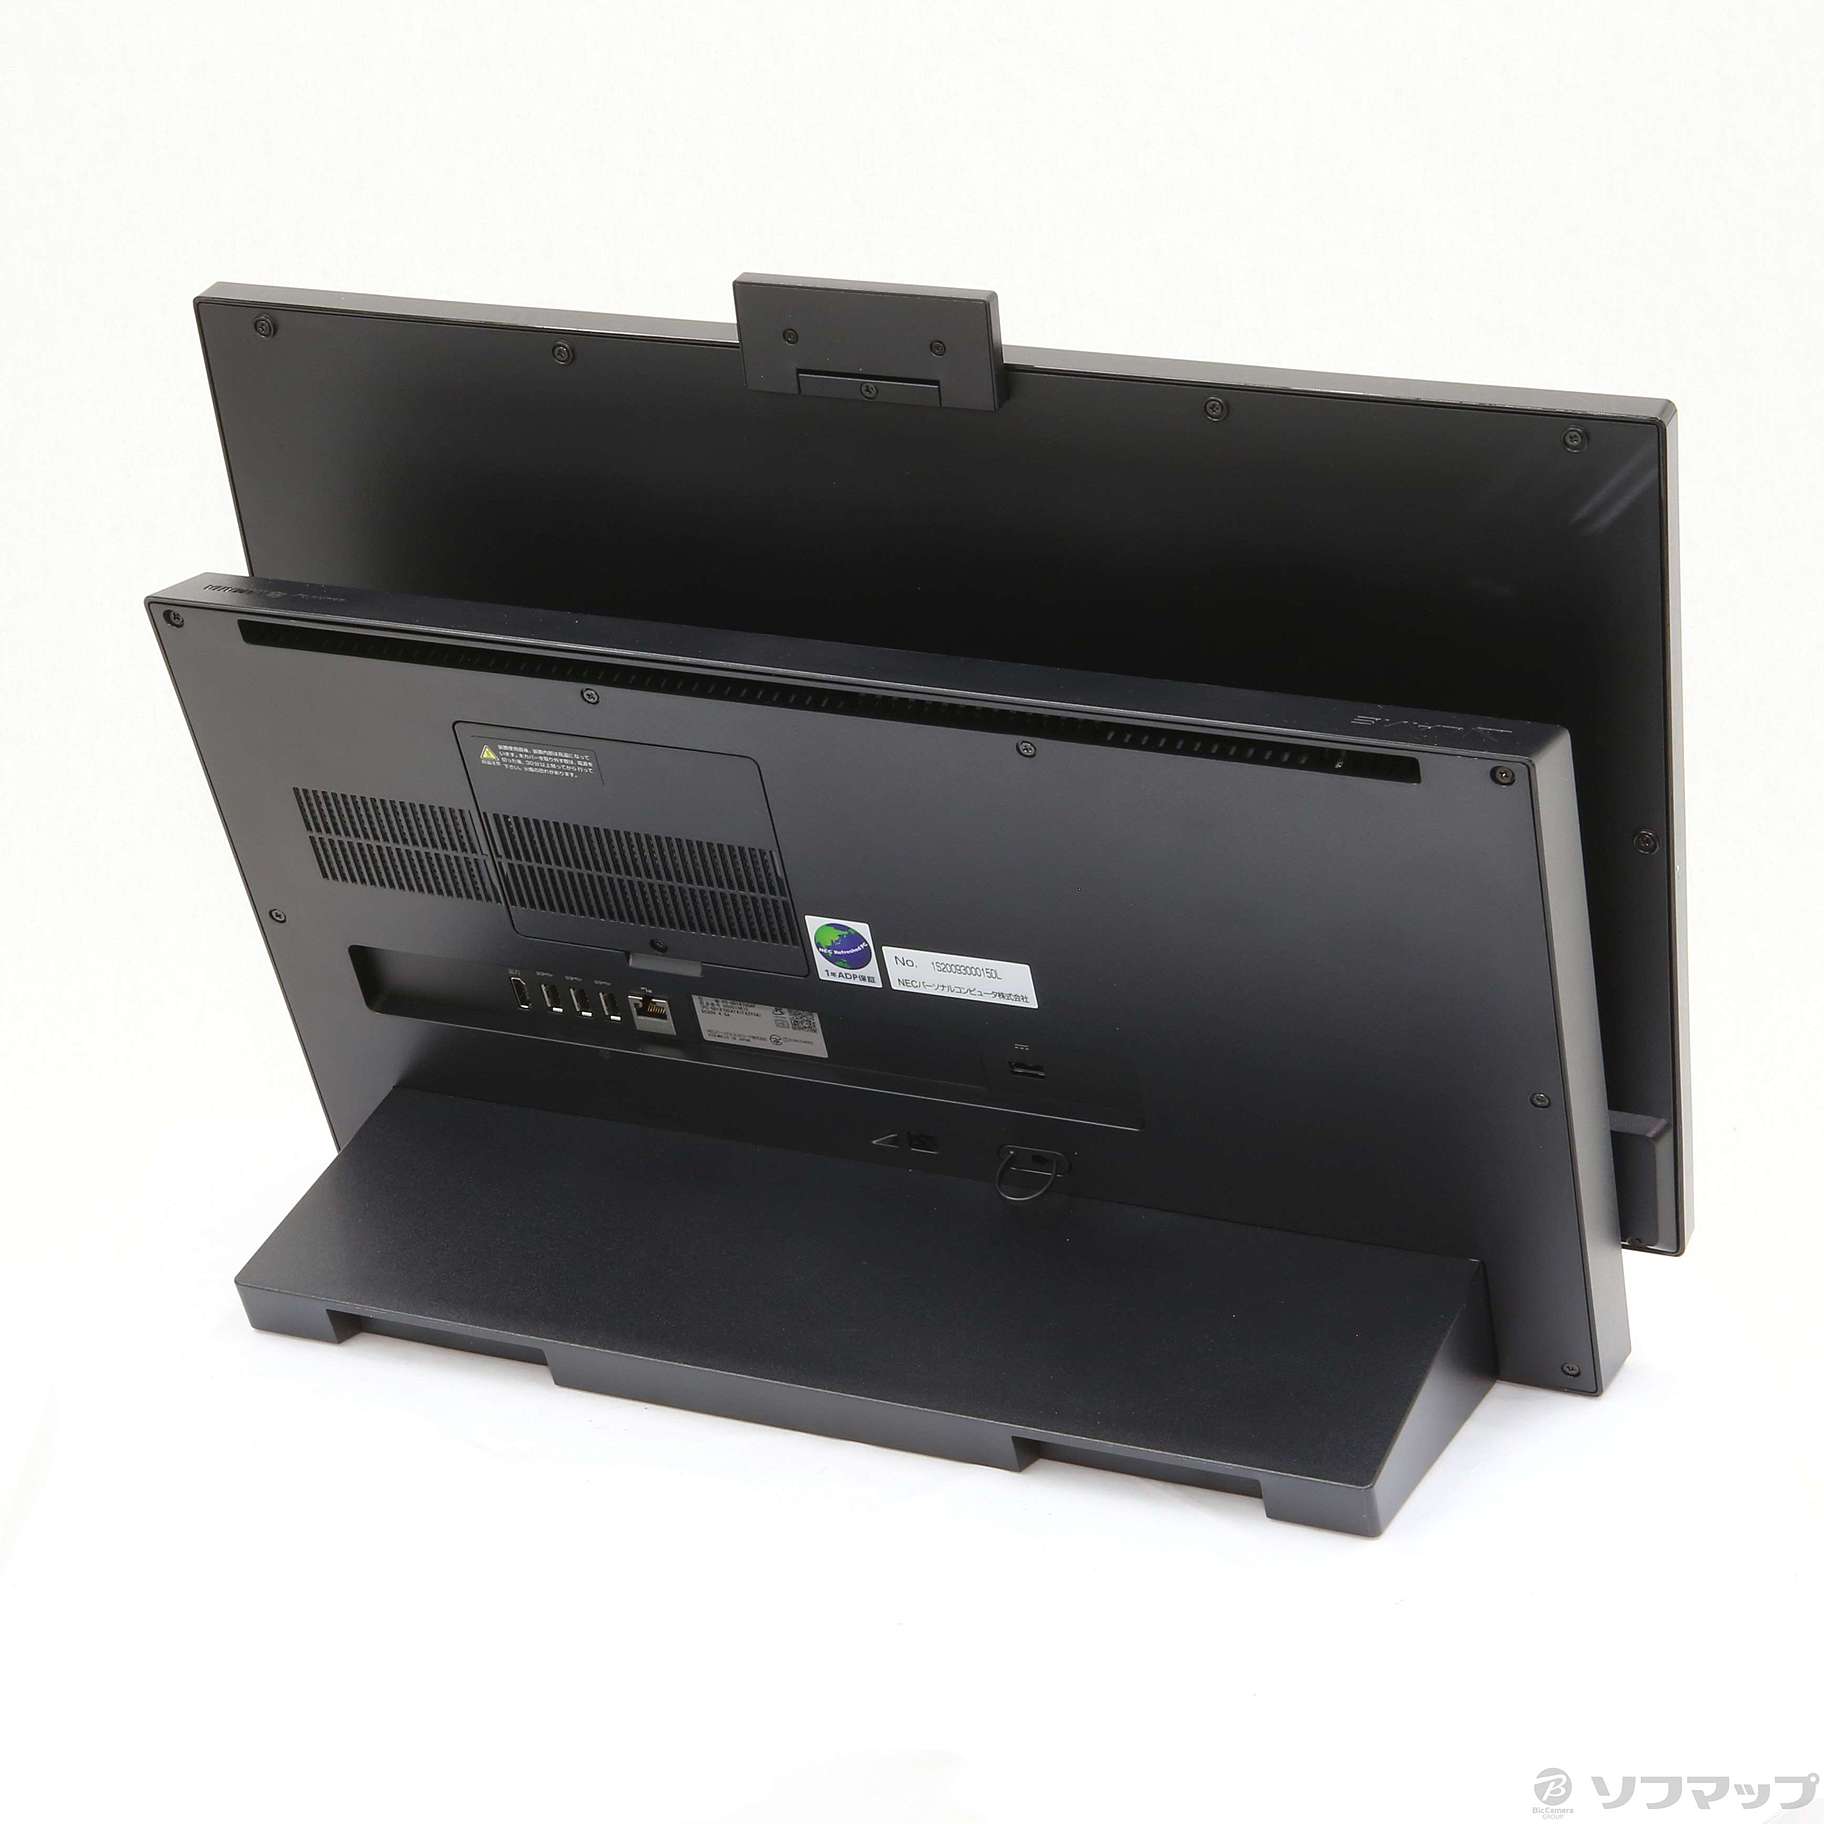 LAVIE Direct DA PC-GD187UCAF 〔NEC Refreshed PC〕 〔Windows 10〕 〔Office付〕  ≪メーカー保証あり≫